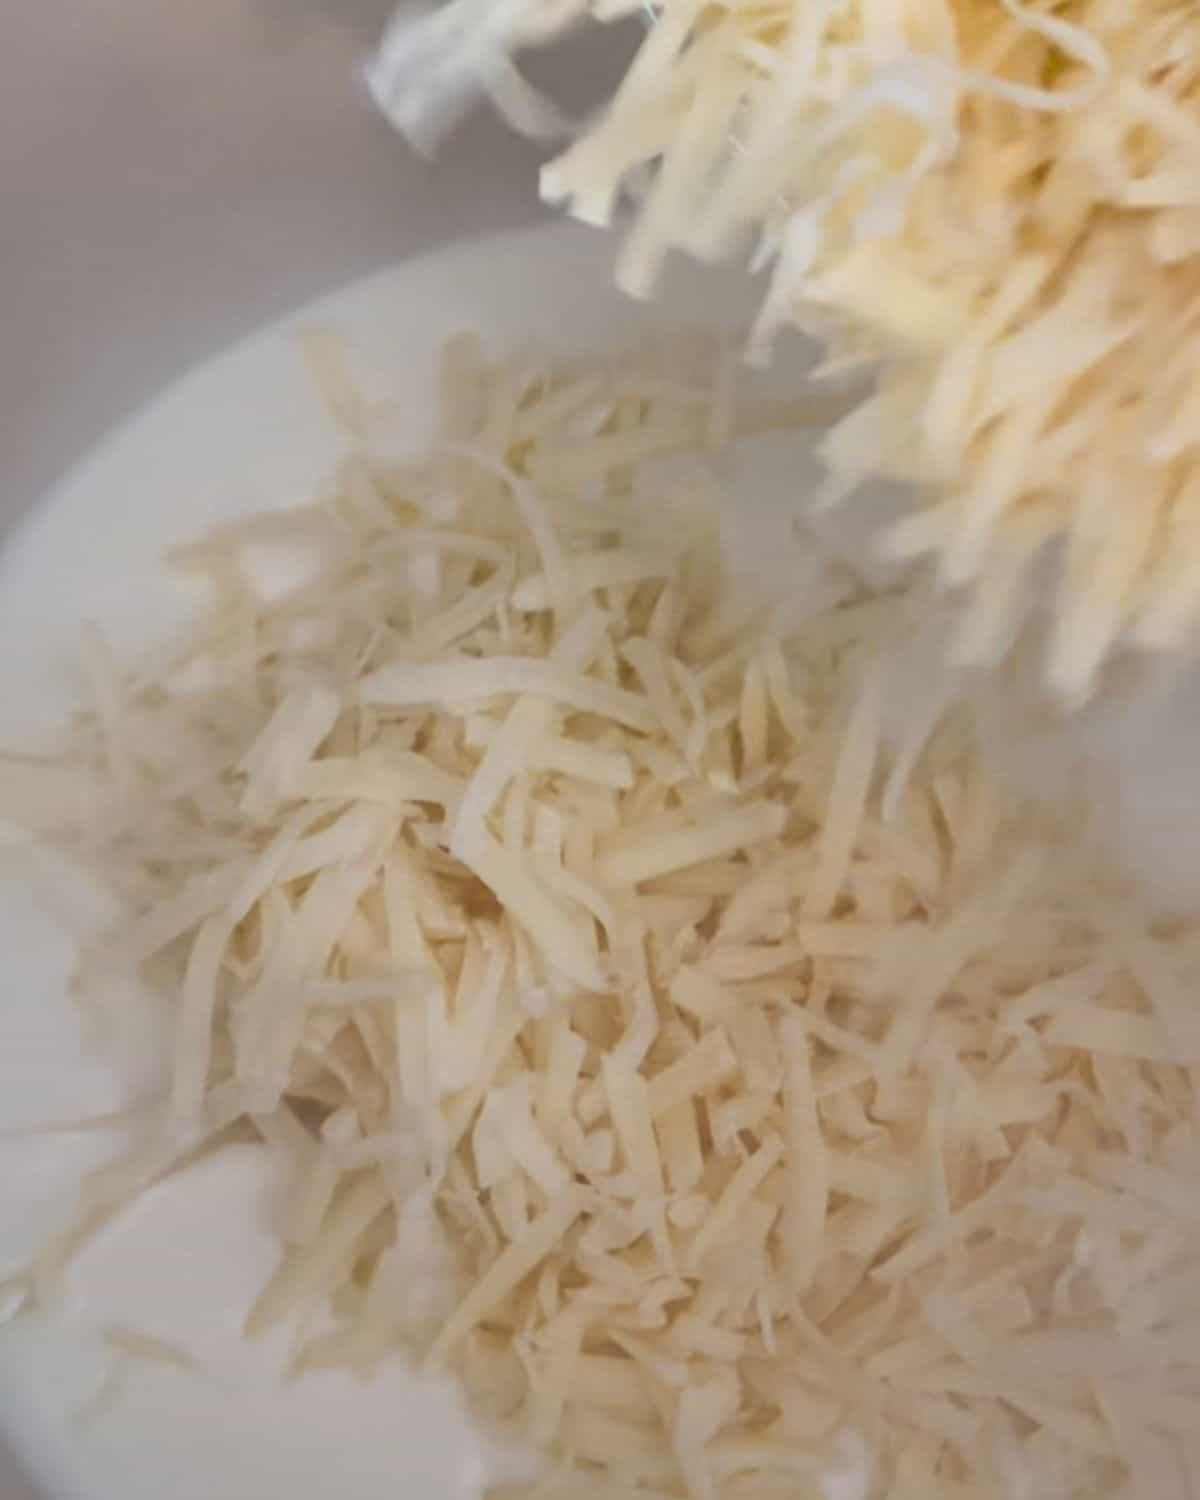 Shredded cheese being added to roux.